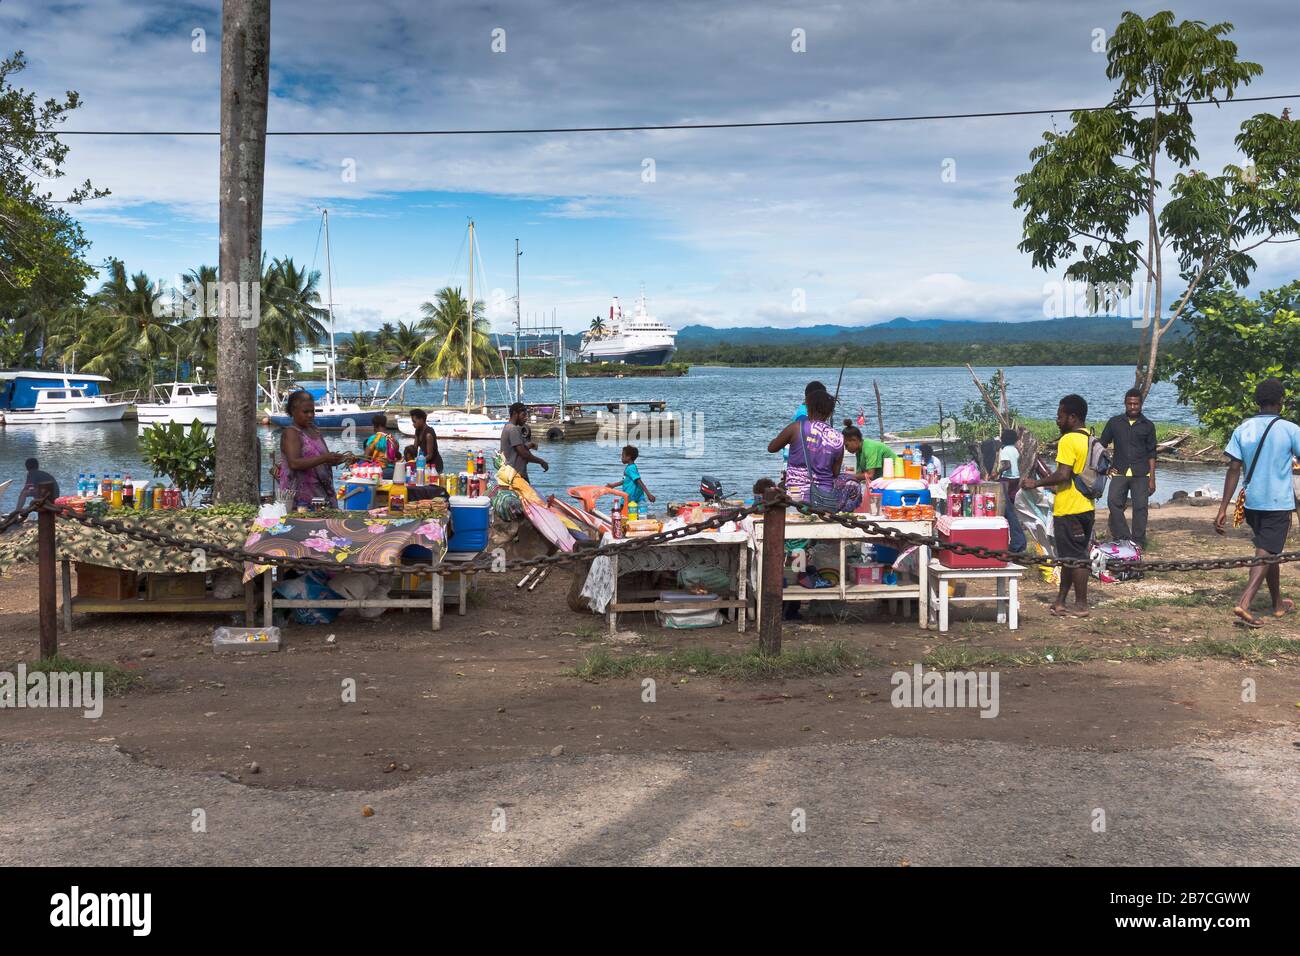 dh MS Boudicca port PNG MADANG PAPUA NEW GUINEA Outdoor Street market at ferry landing cruise ship berthed in harbour islands Stock Photo